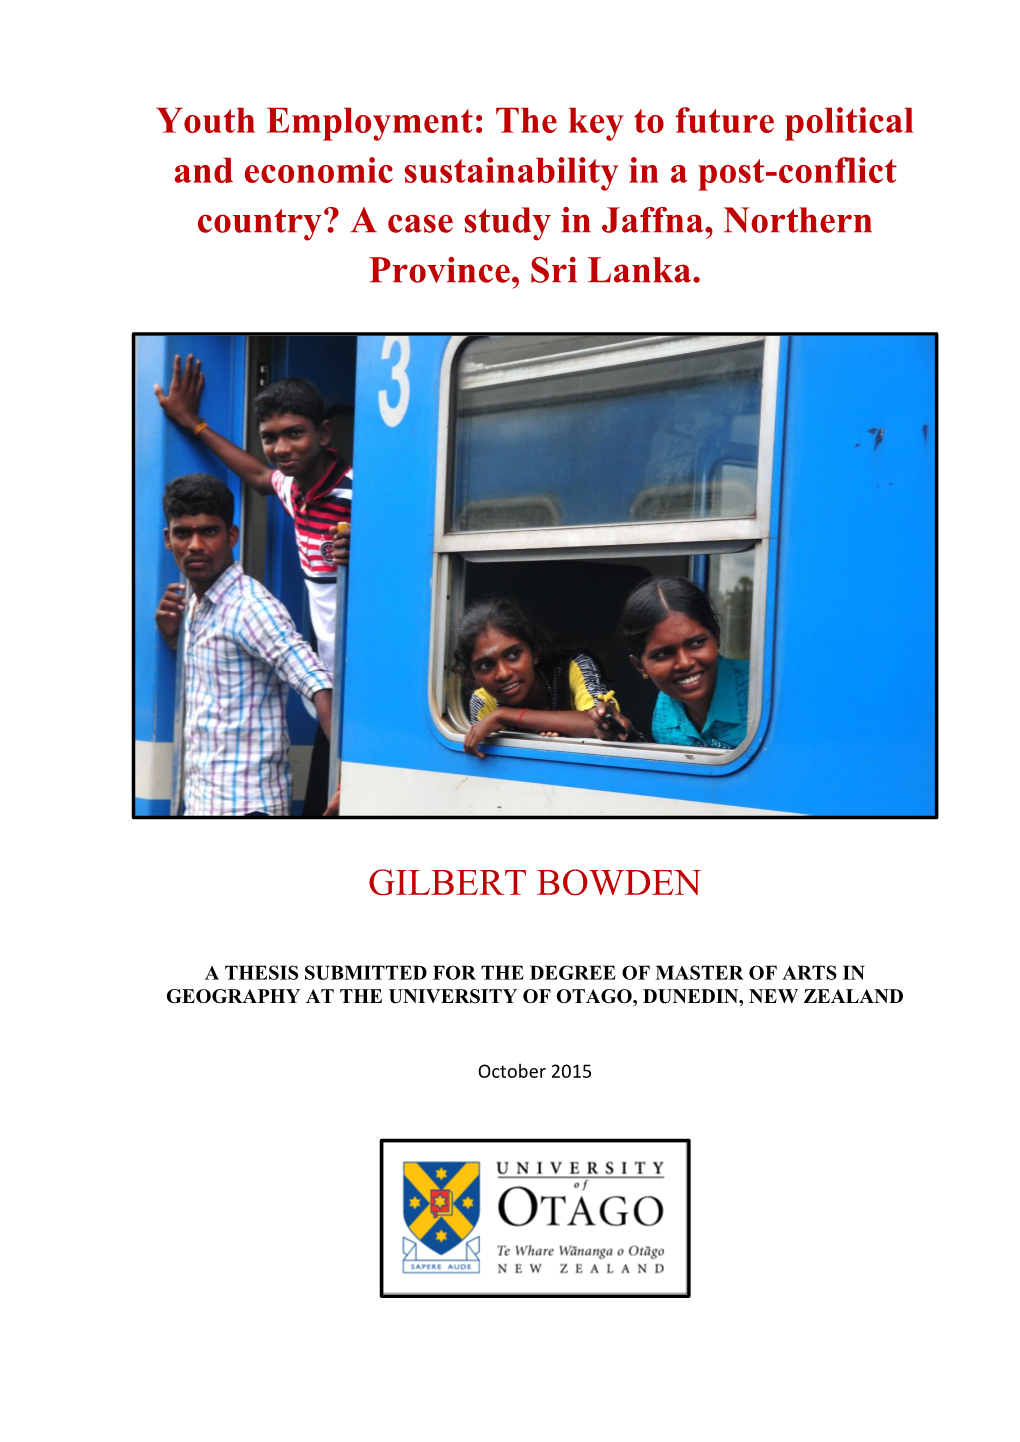 Youth Employment: the Key to Future Political and Economic Sustainability in a Post-Conflict Country? a Case Study in Jaffna, Northern Province, Sri Lanka